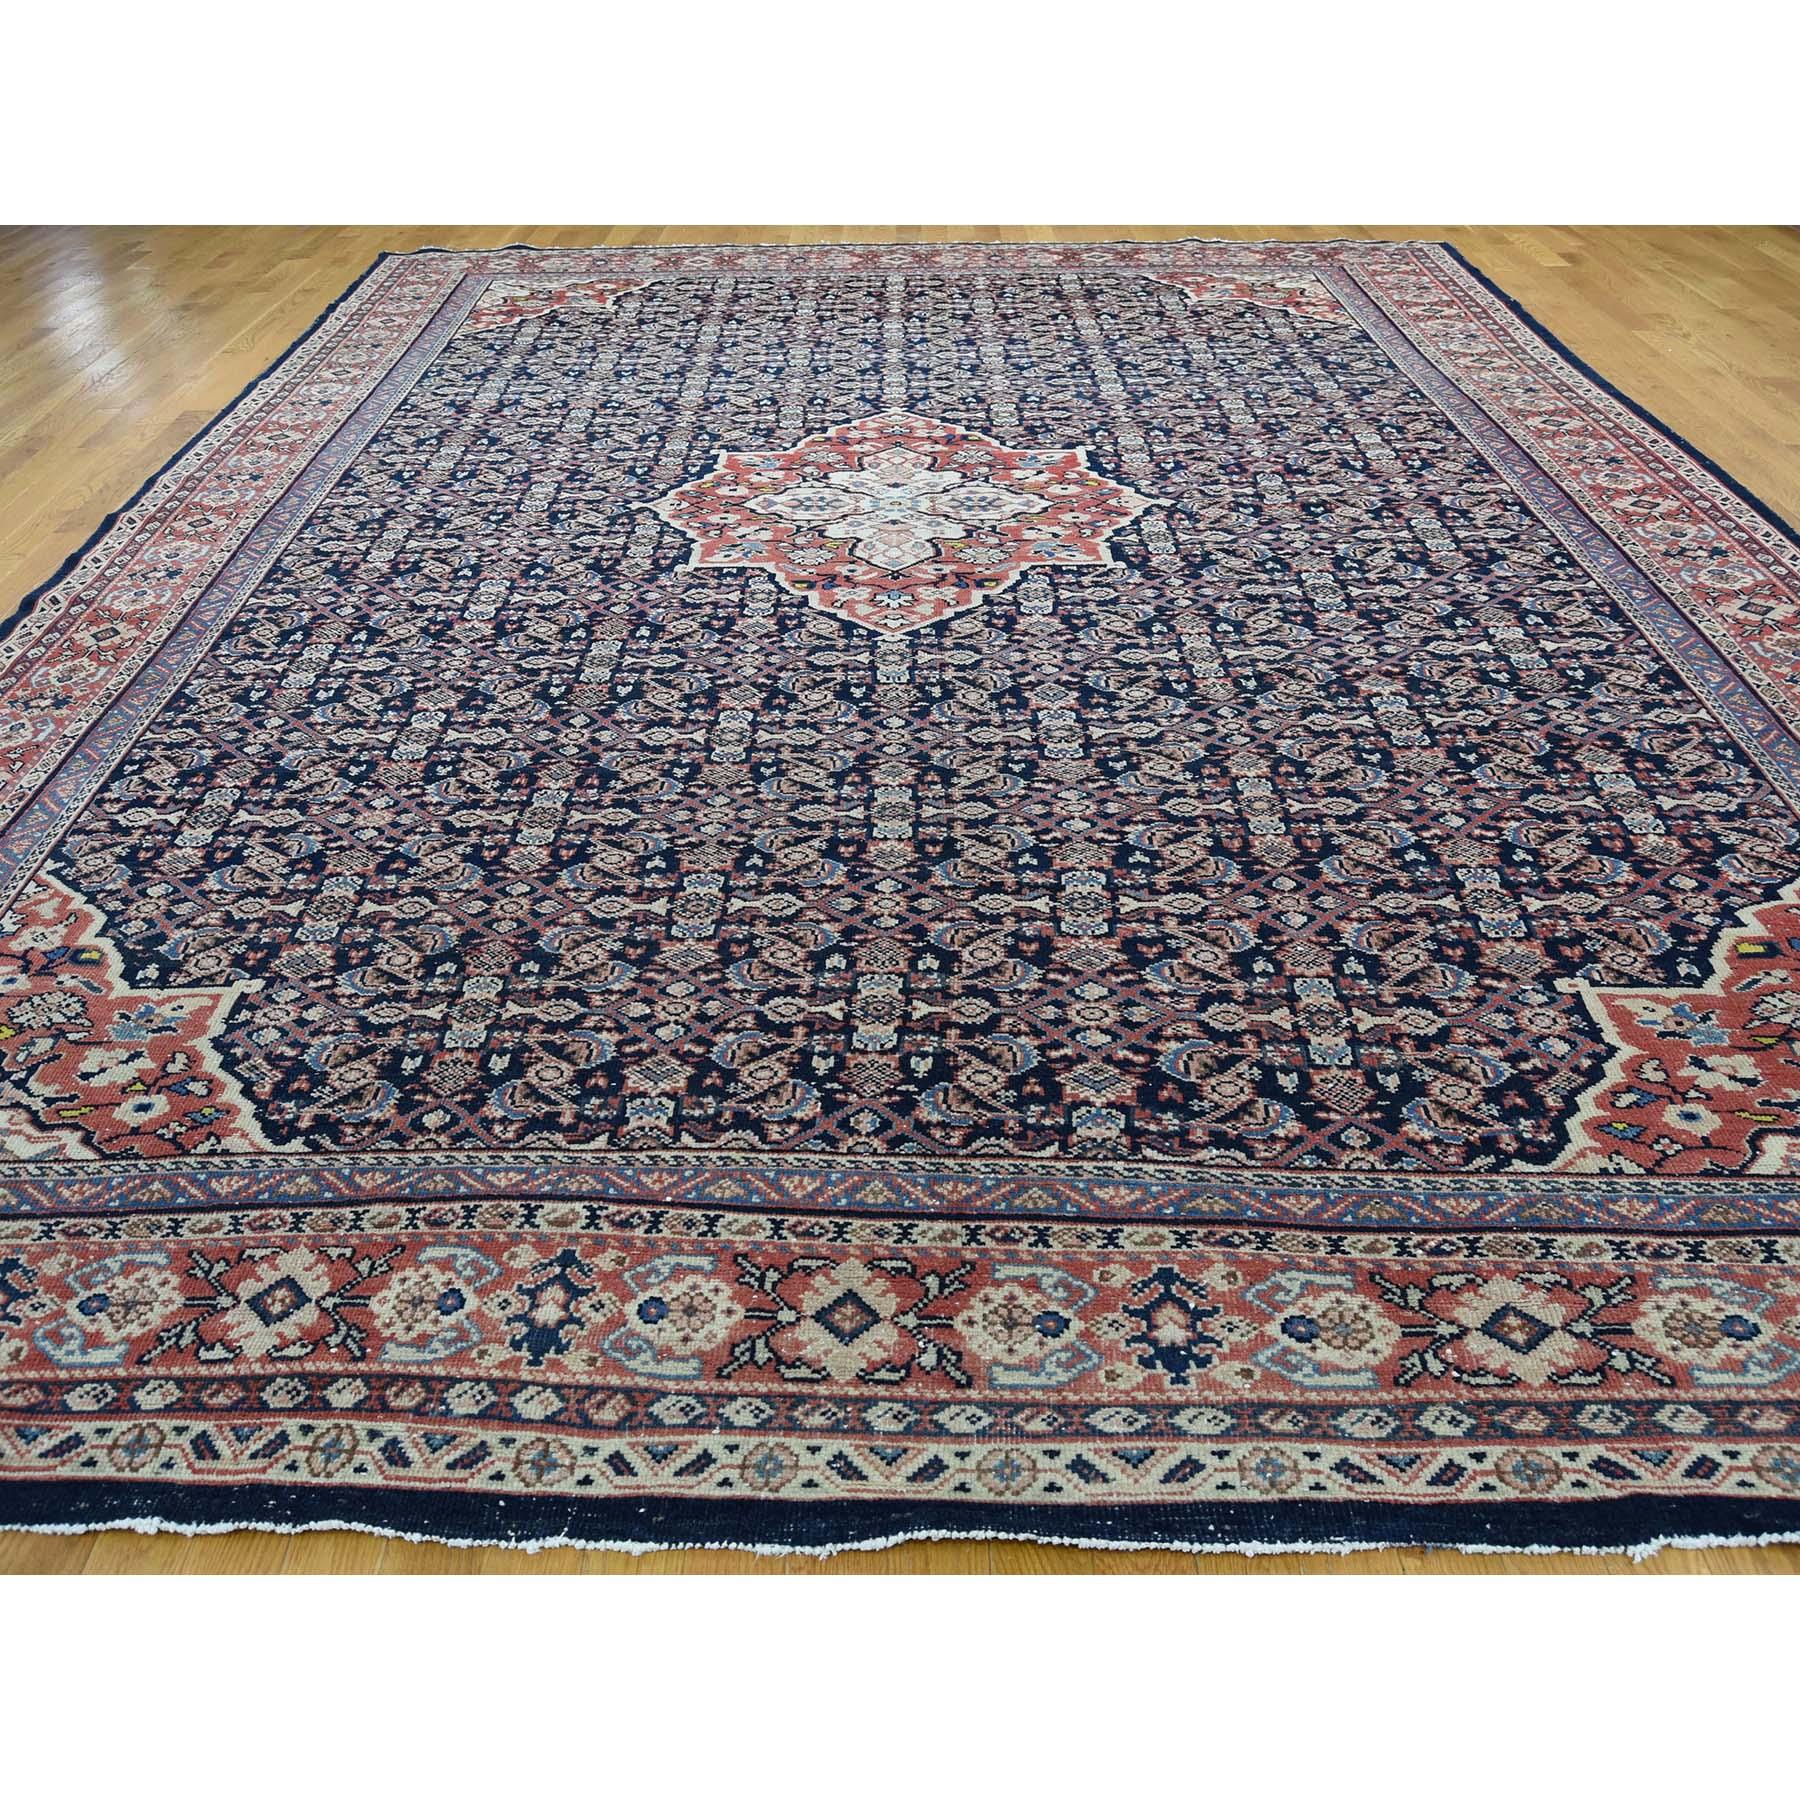 Other Antique Persian Mahal Even Wear Navy Blue Hand-Knotted Oriental Rug